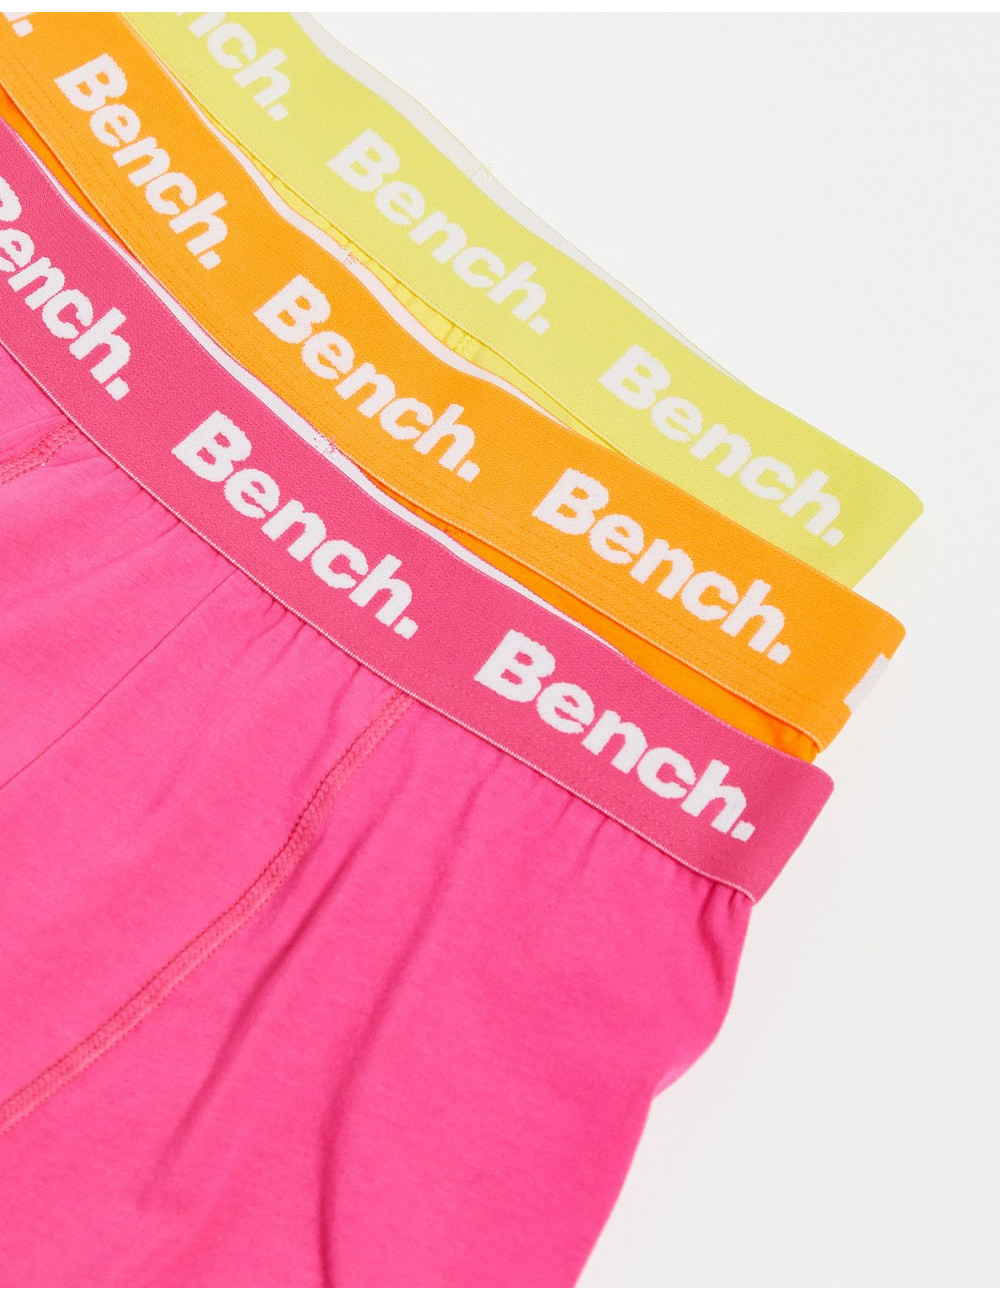 Bench Dwight 3 pack boxers...